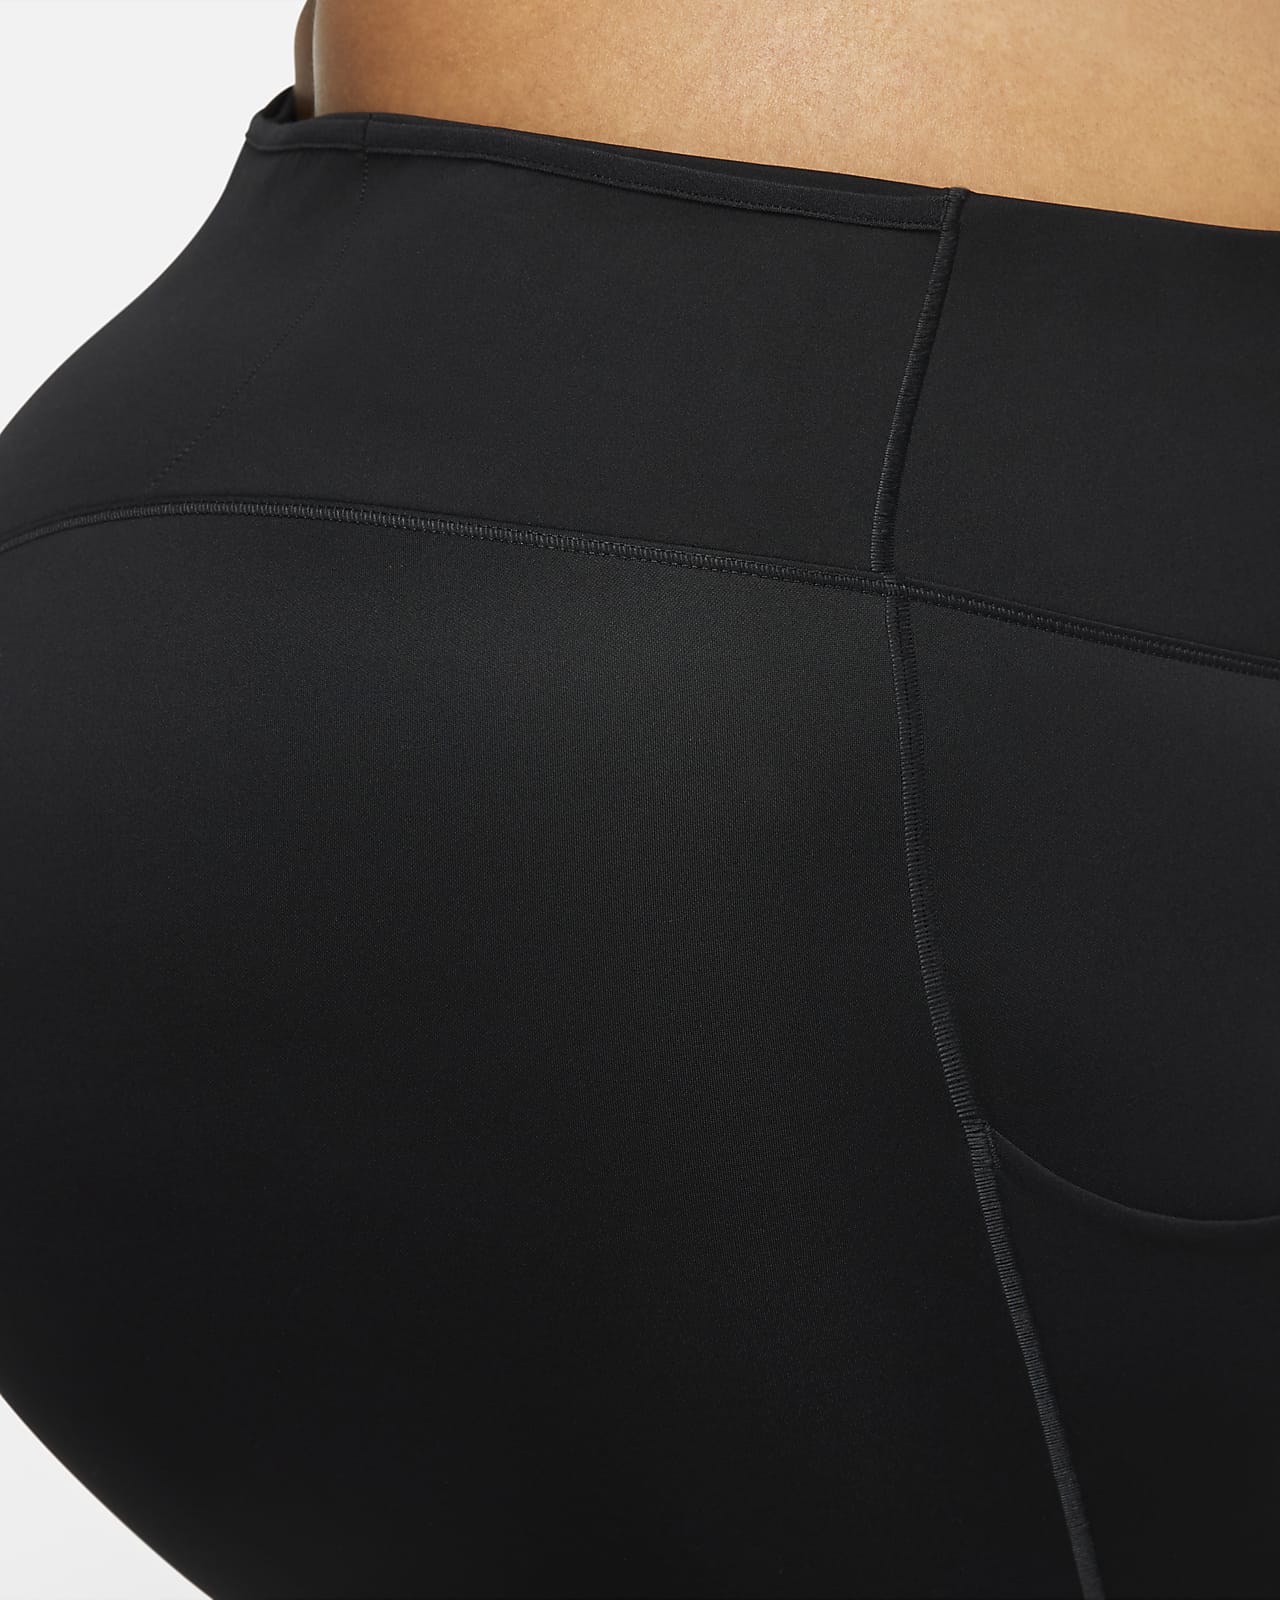 Solid Color Women Leggings Anti-roll Edgey Sports Pants Tights